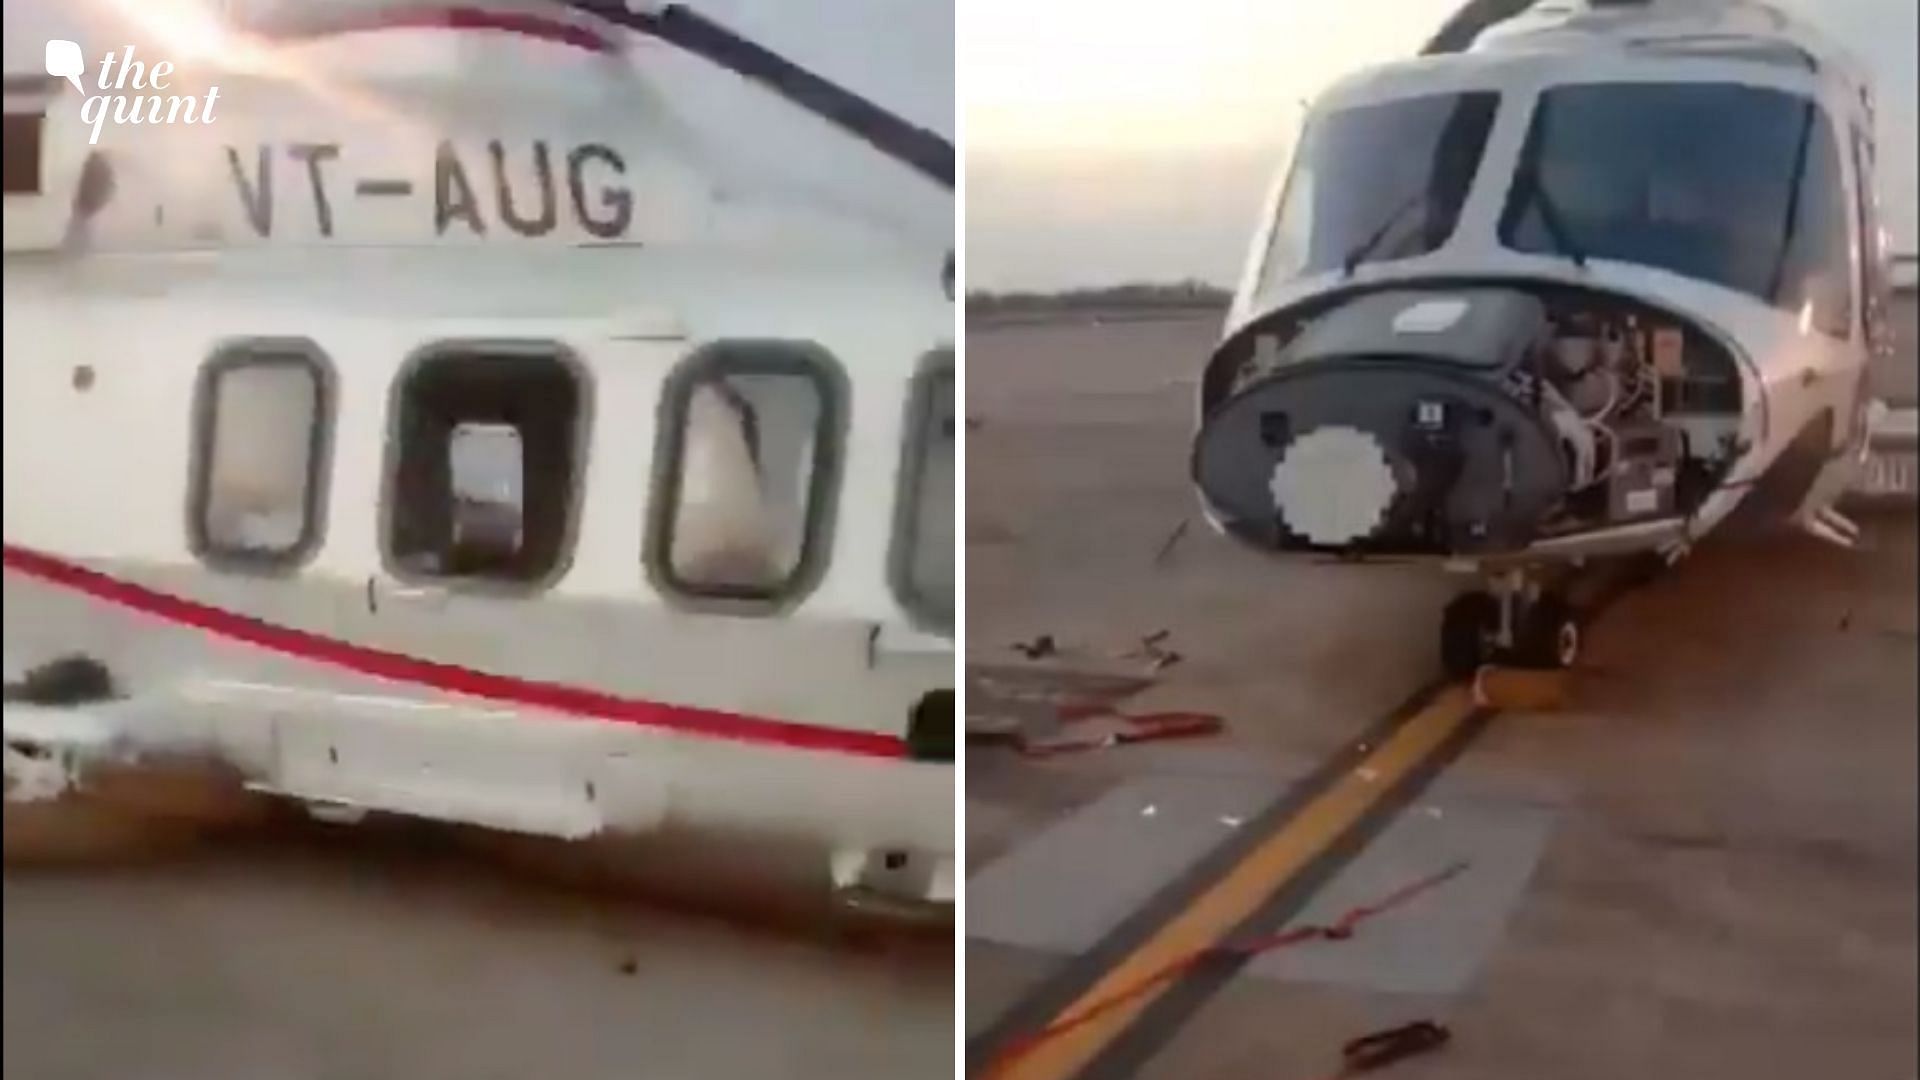 A 25 year-old-man sneaked into a govt hanger at Bhopal airport and damaged a parked helicopter before being caught by CISF.